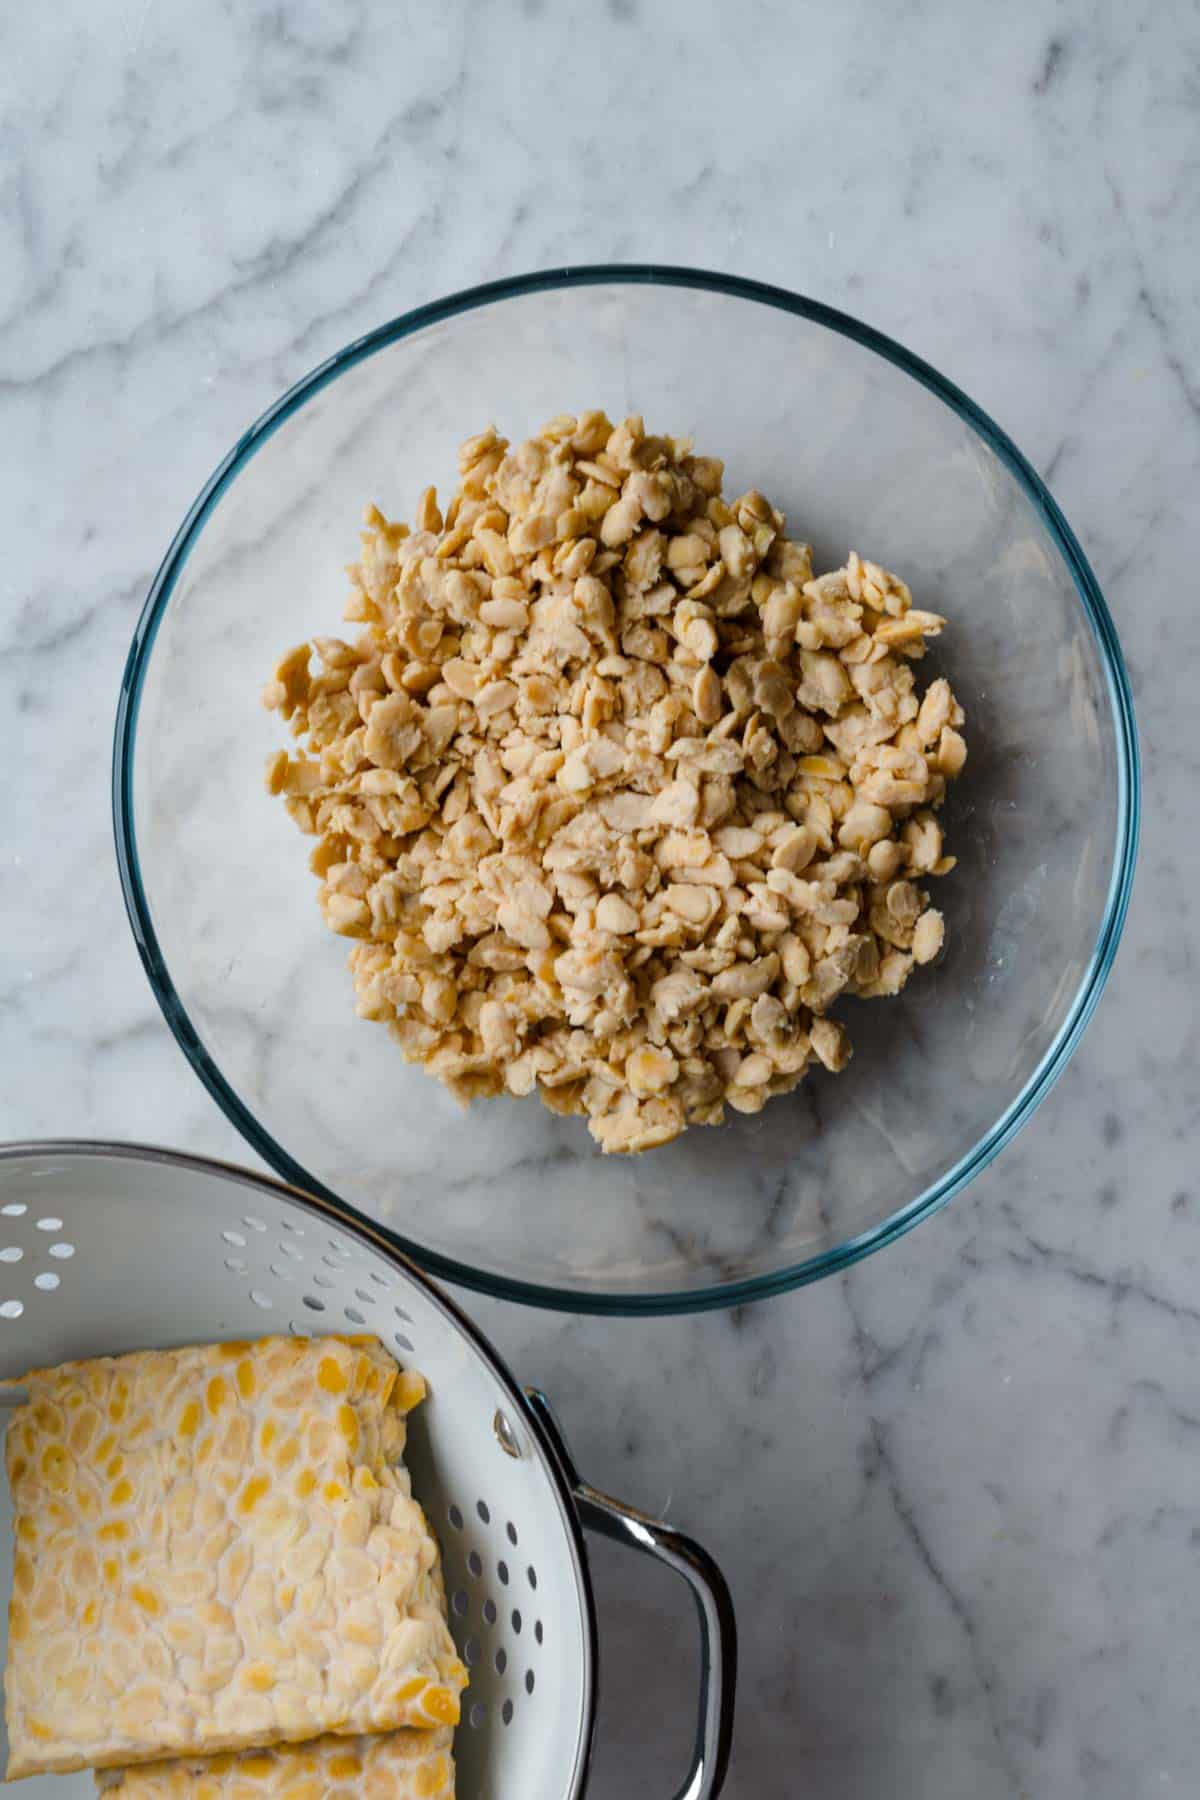 Tempeh crumbles in a glass bowl and a block of tempeh in a white colander.